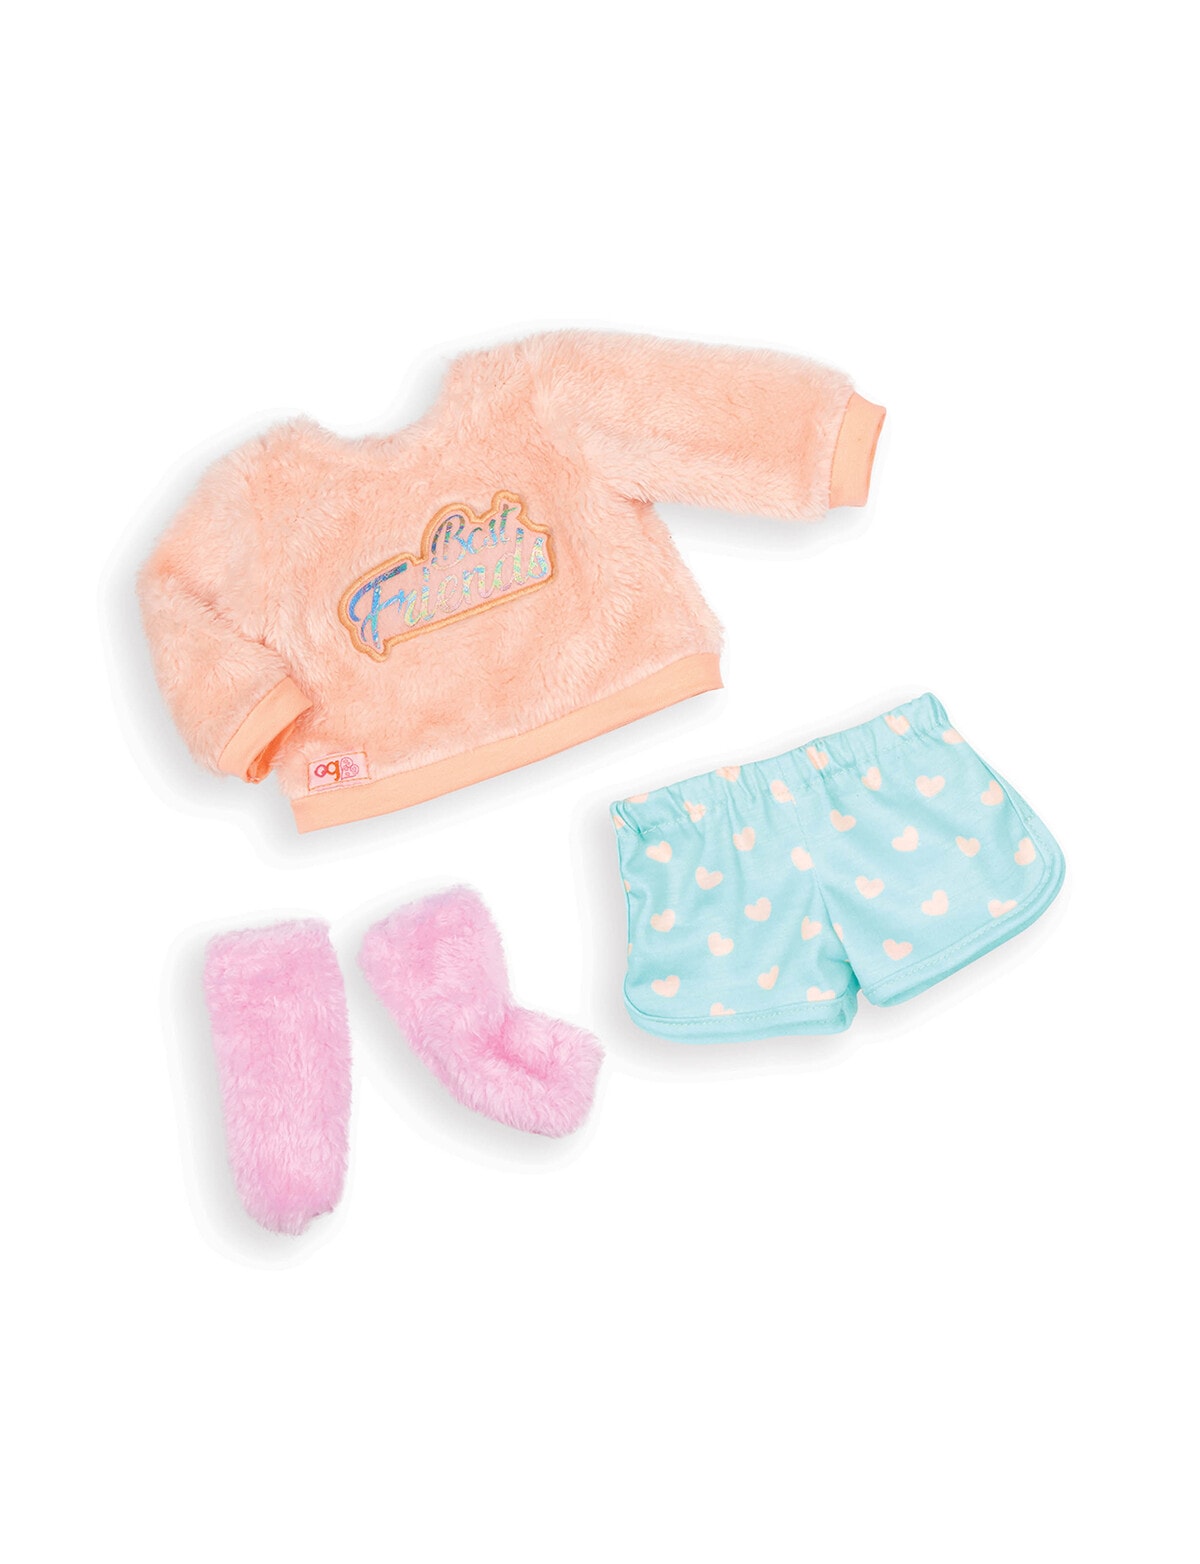 Our Generation Lumi Slumber Party Doll - Dolls & Accessories